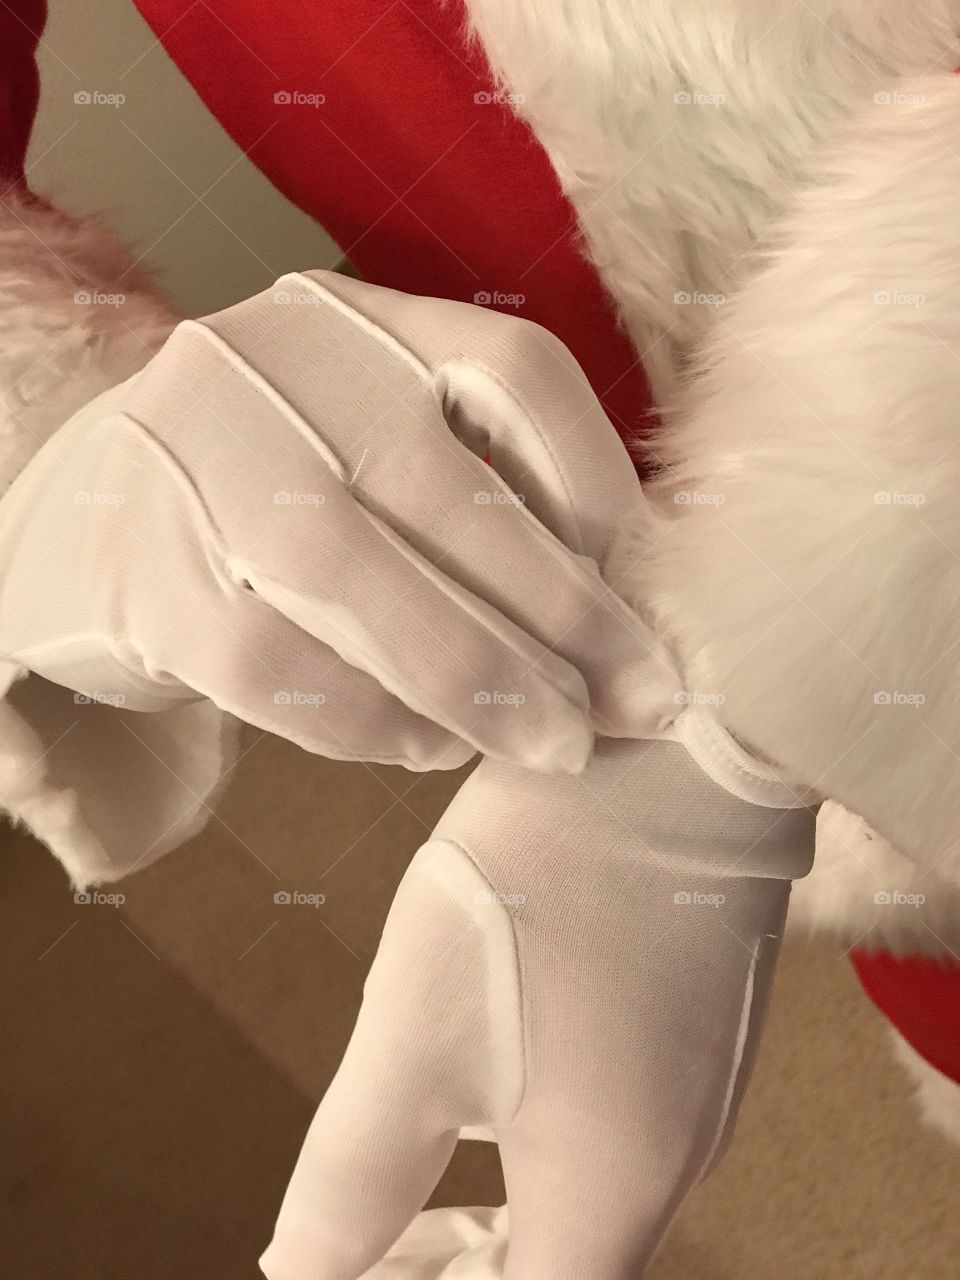 Santa Claus is getting ready for the big night.  Time to put on the white gloves!  Christmas time moments.